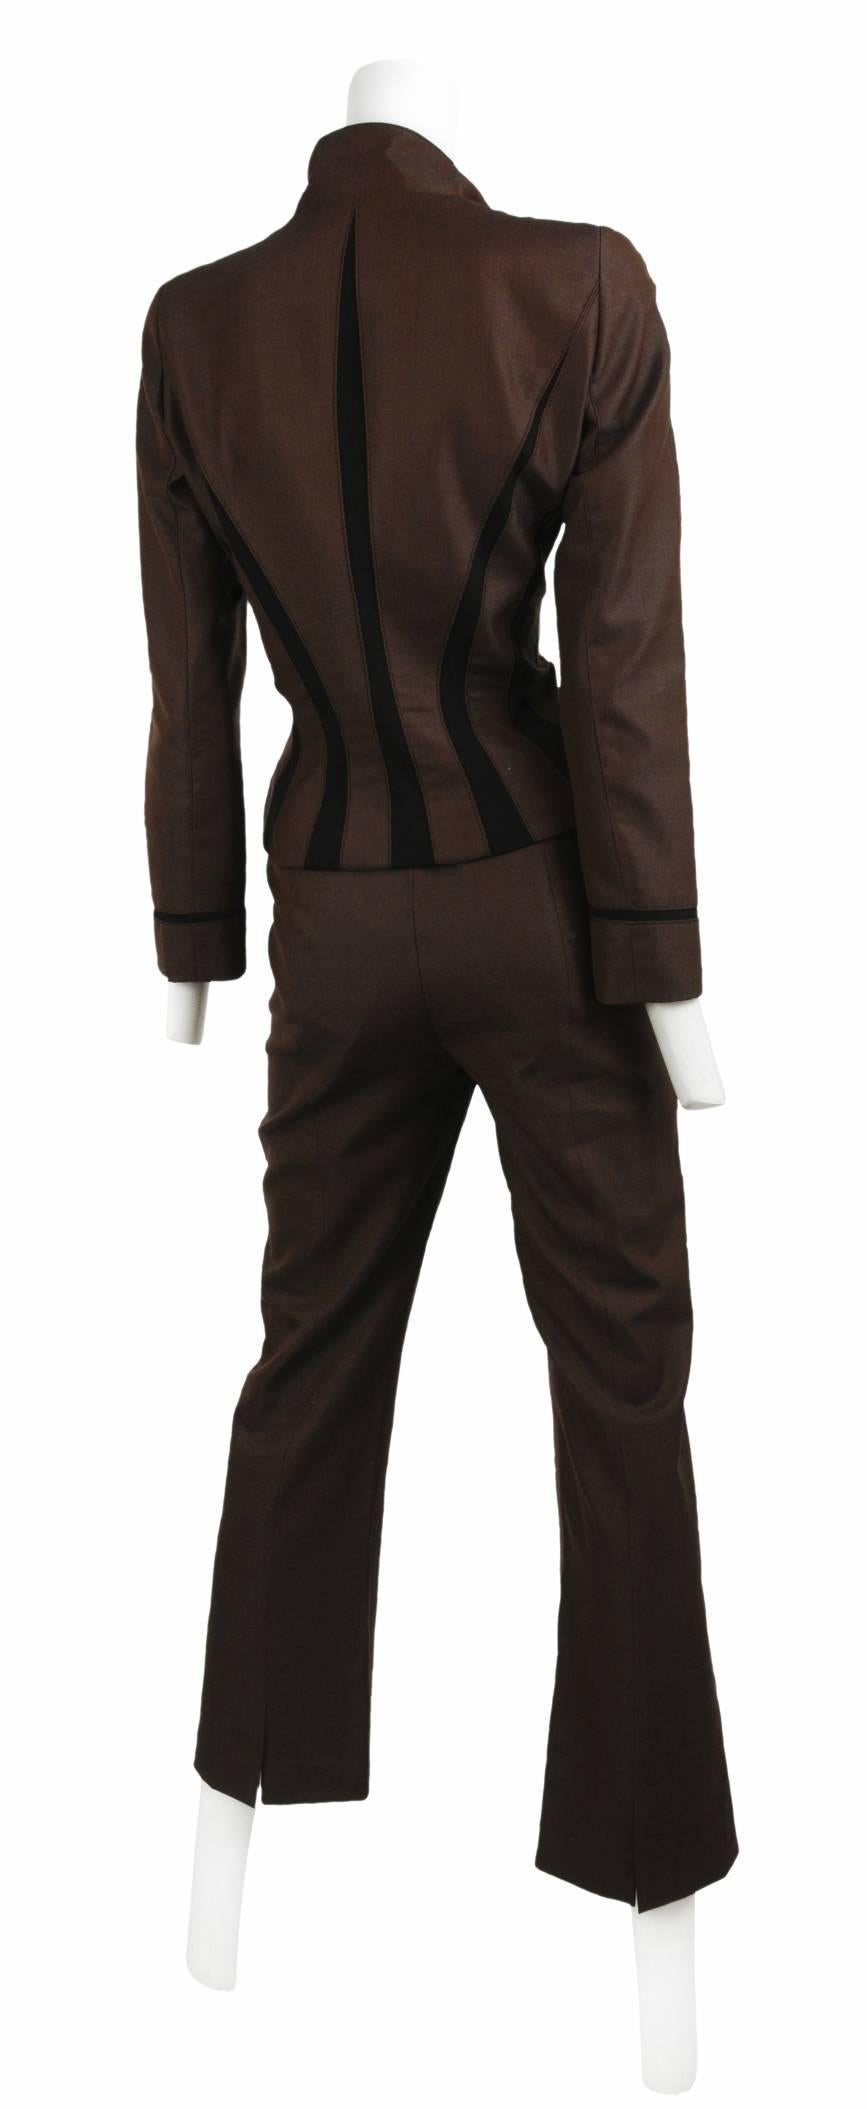 Vintage Thierry Mugler Couture brown silk darted pant suit with black insets and exaggerated shoulders.